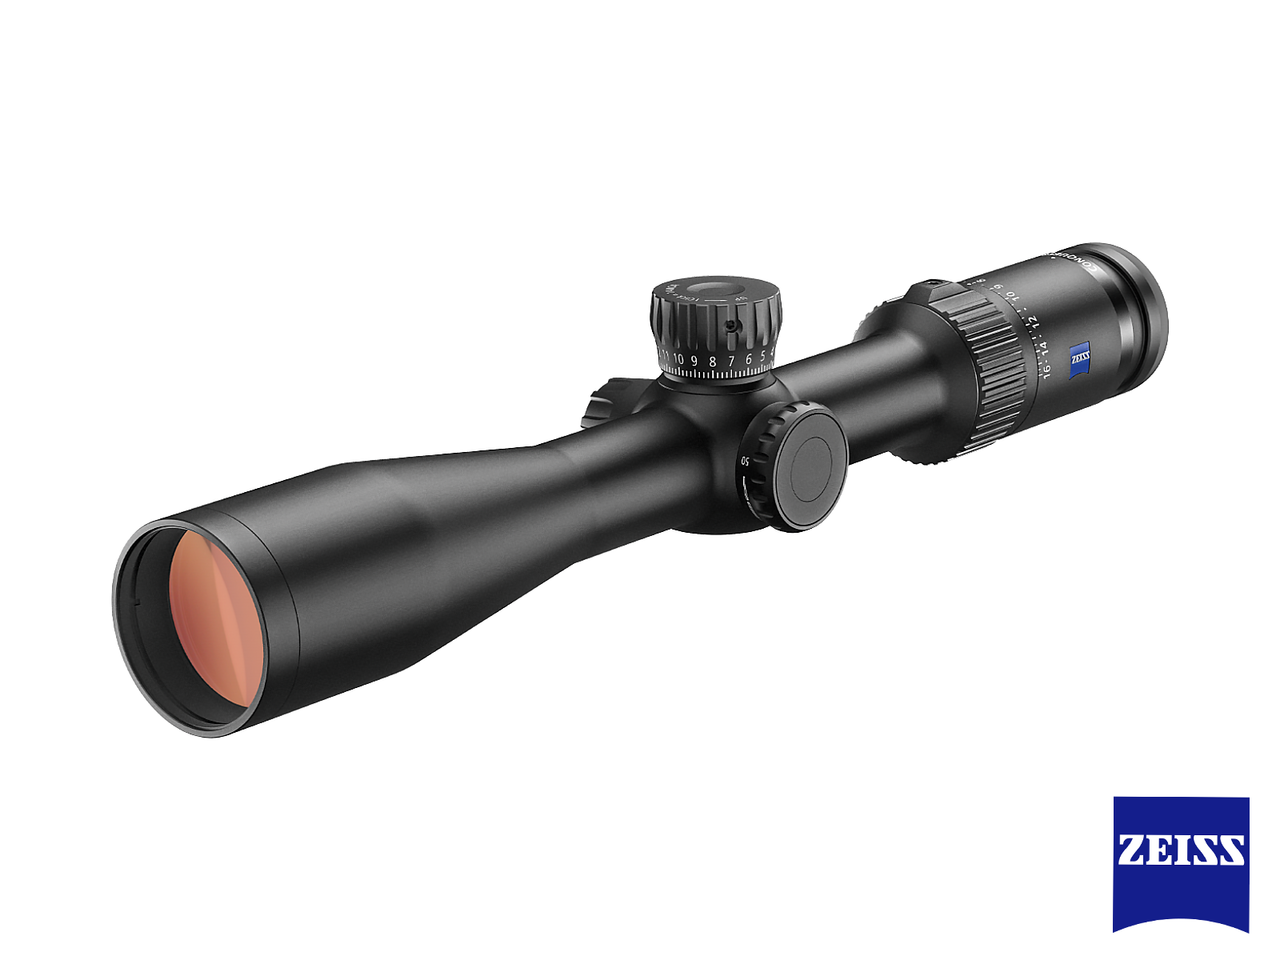 Zeiss Conquest V4 4-16x44 ill. #93 ZMOA-1 Rifle Scope